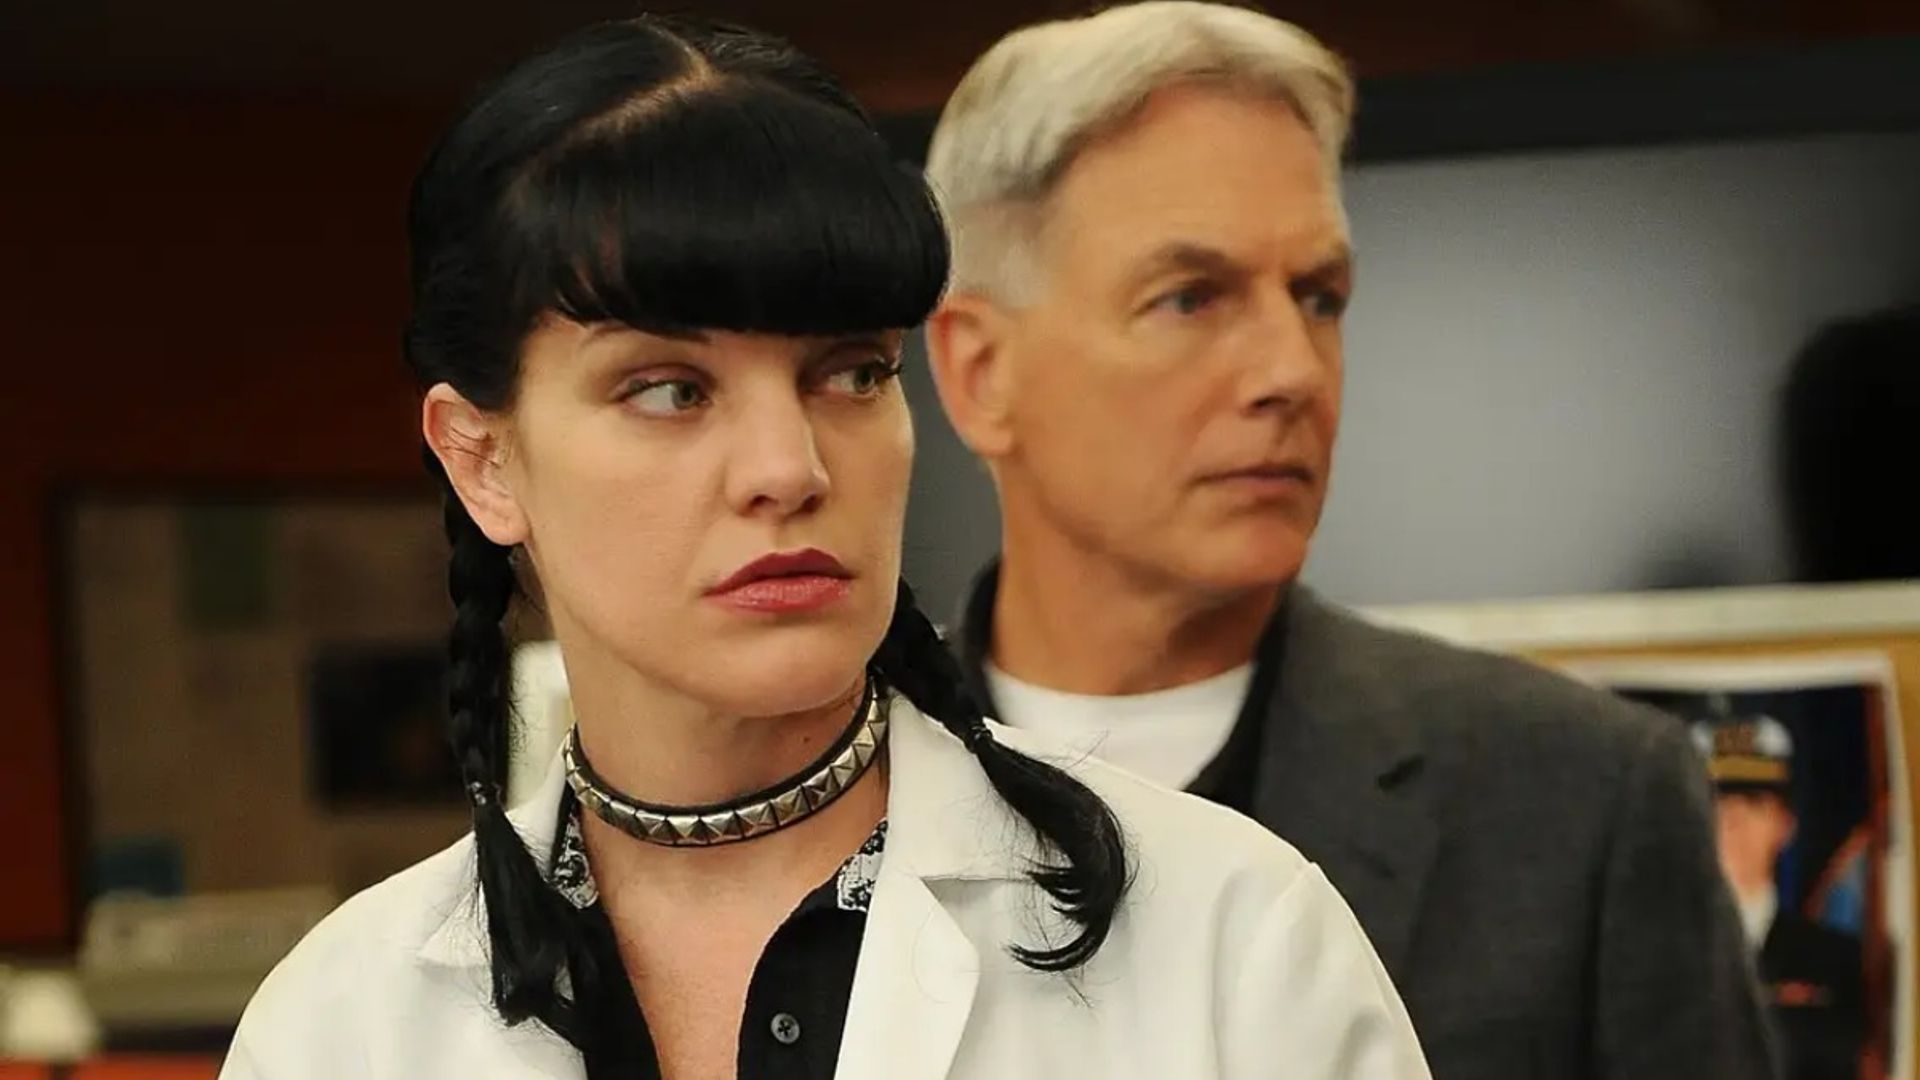 All we know about NCIS #39 Pauley Perrette and Mark Harmon #39 s feud HELLO